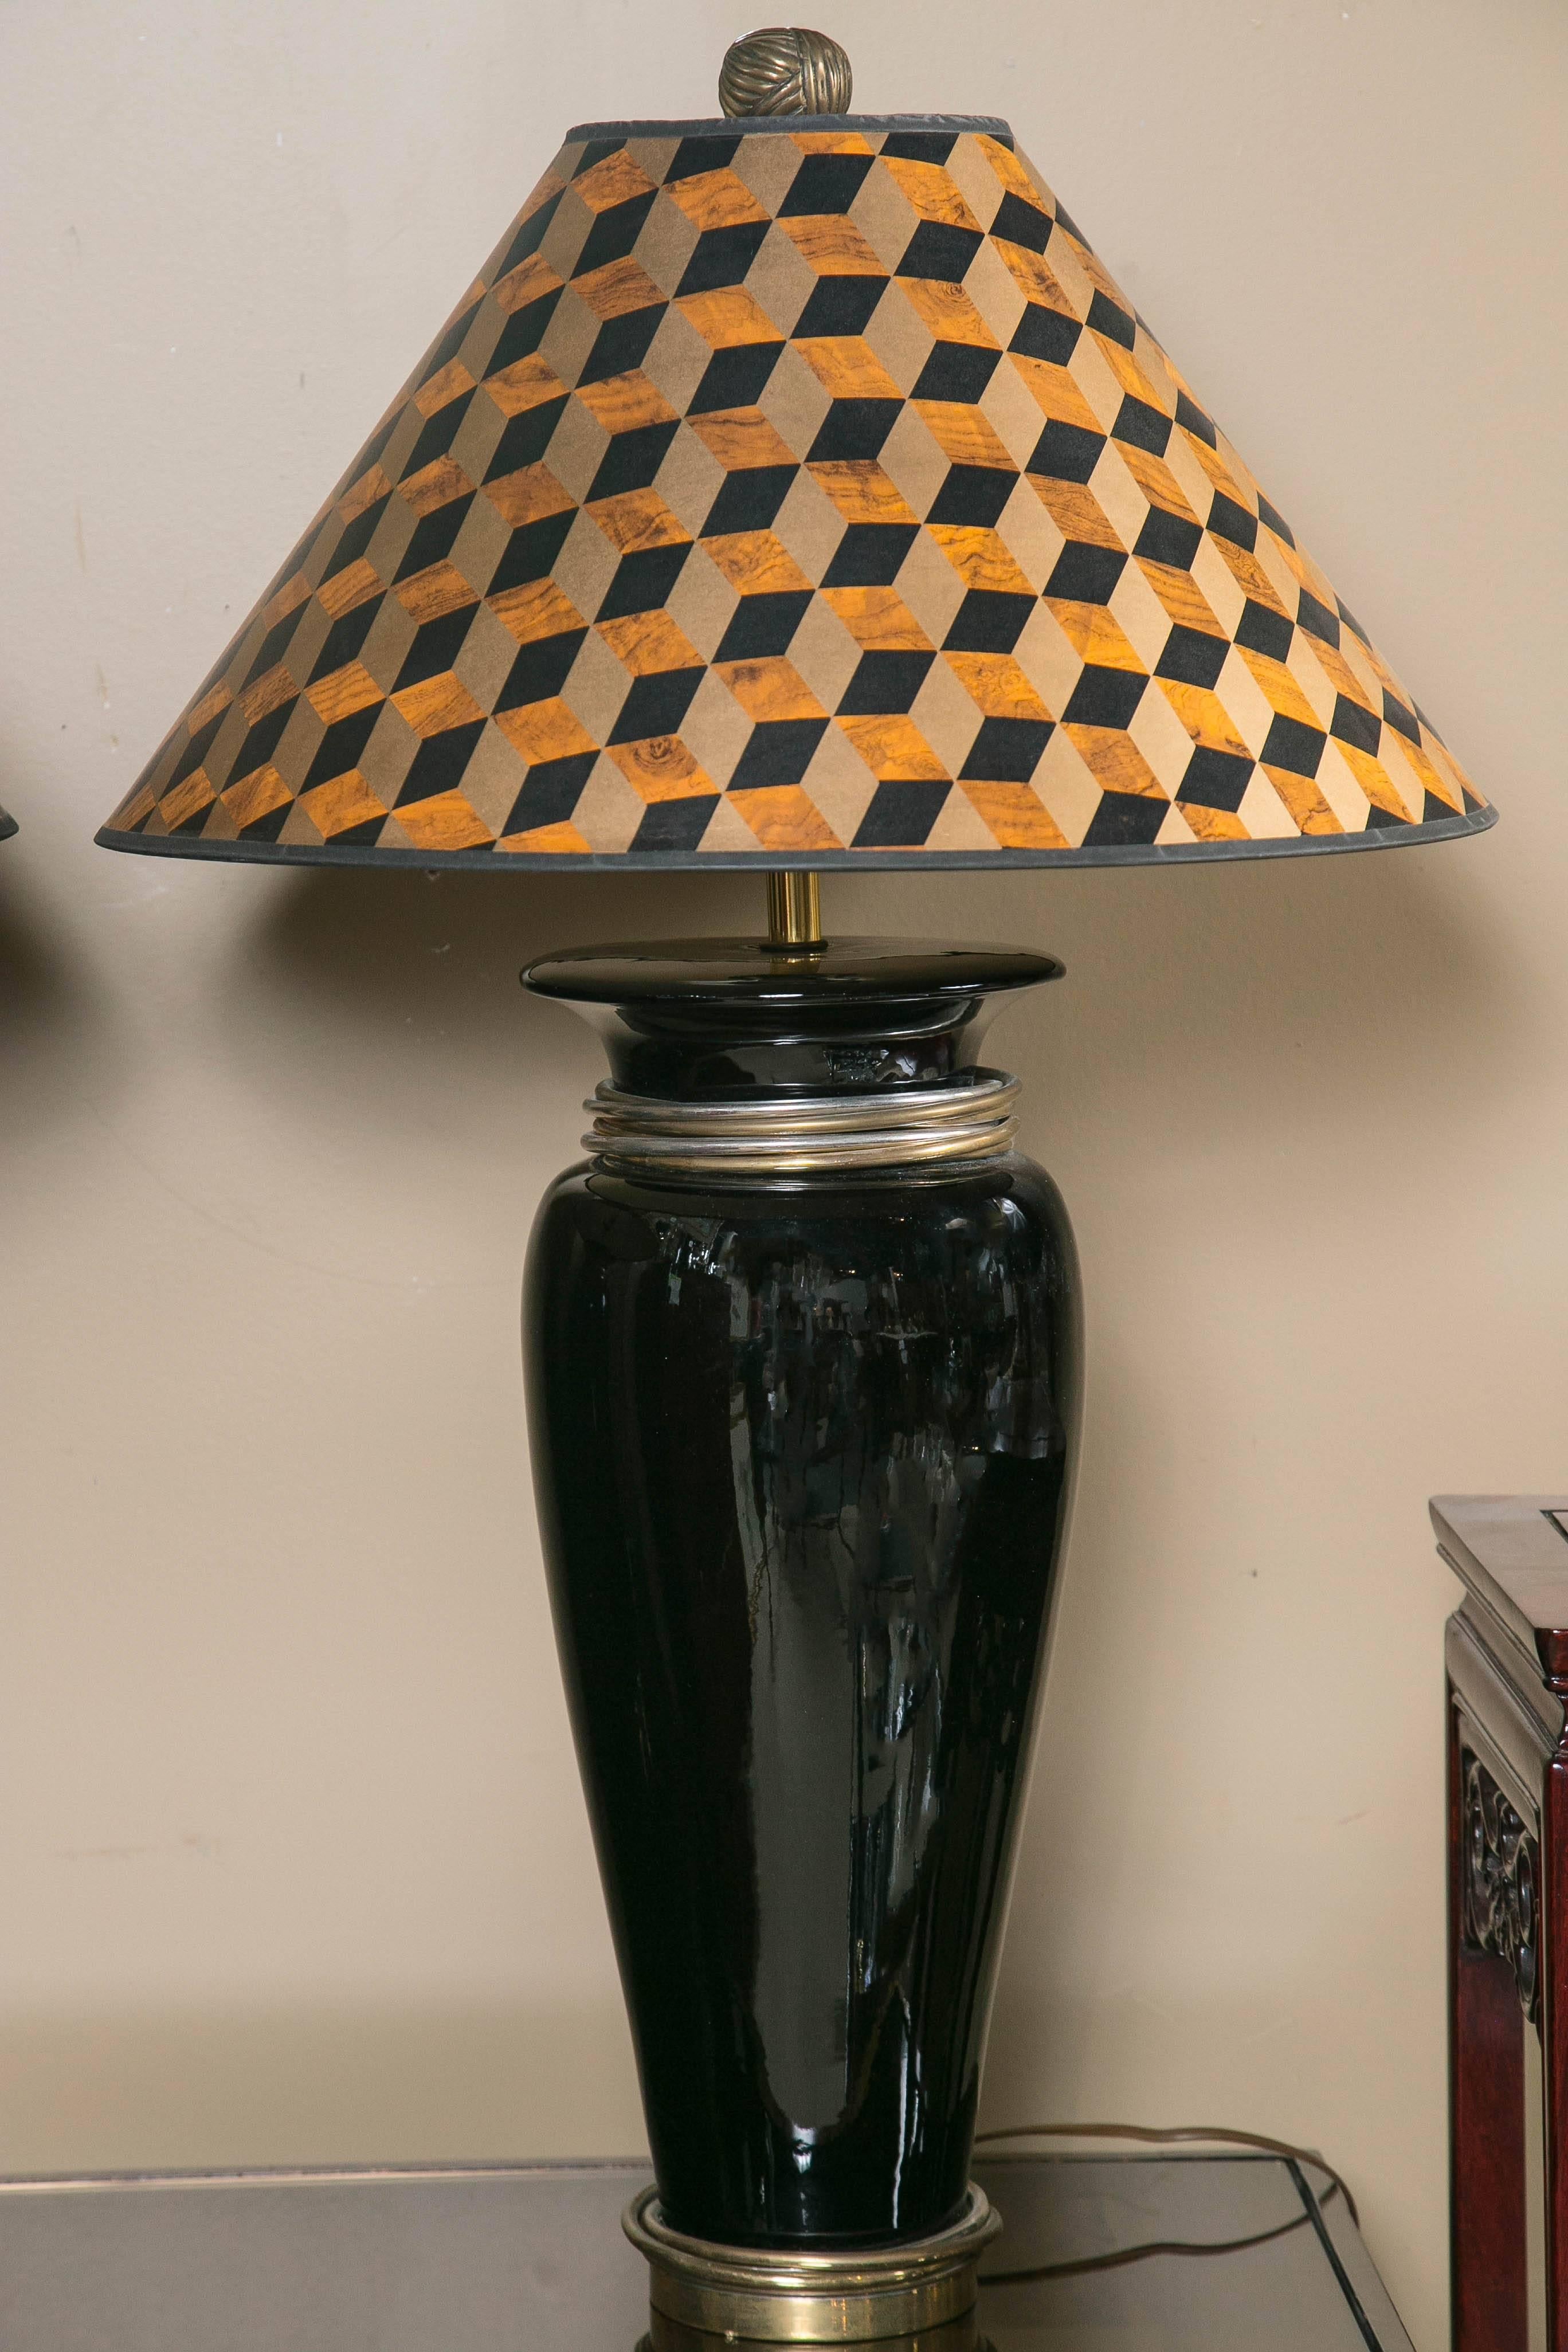 Black ceramic urn form lamps with tonal metal loose rings at neck and base, retaining their original optical grid patterned paper shades, substantial knob finials, labels and wiring, which is in good working order.